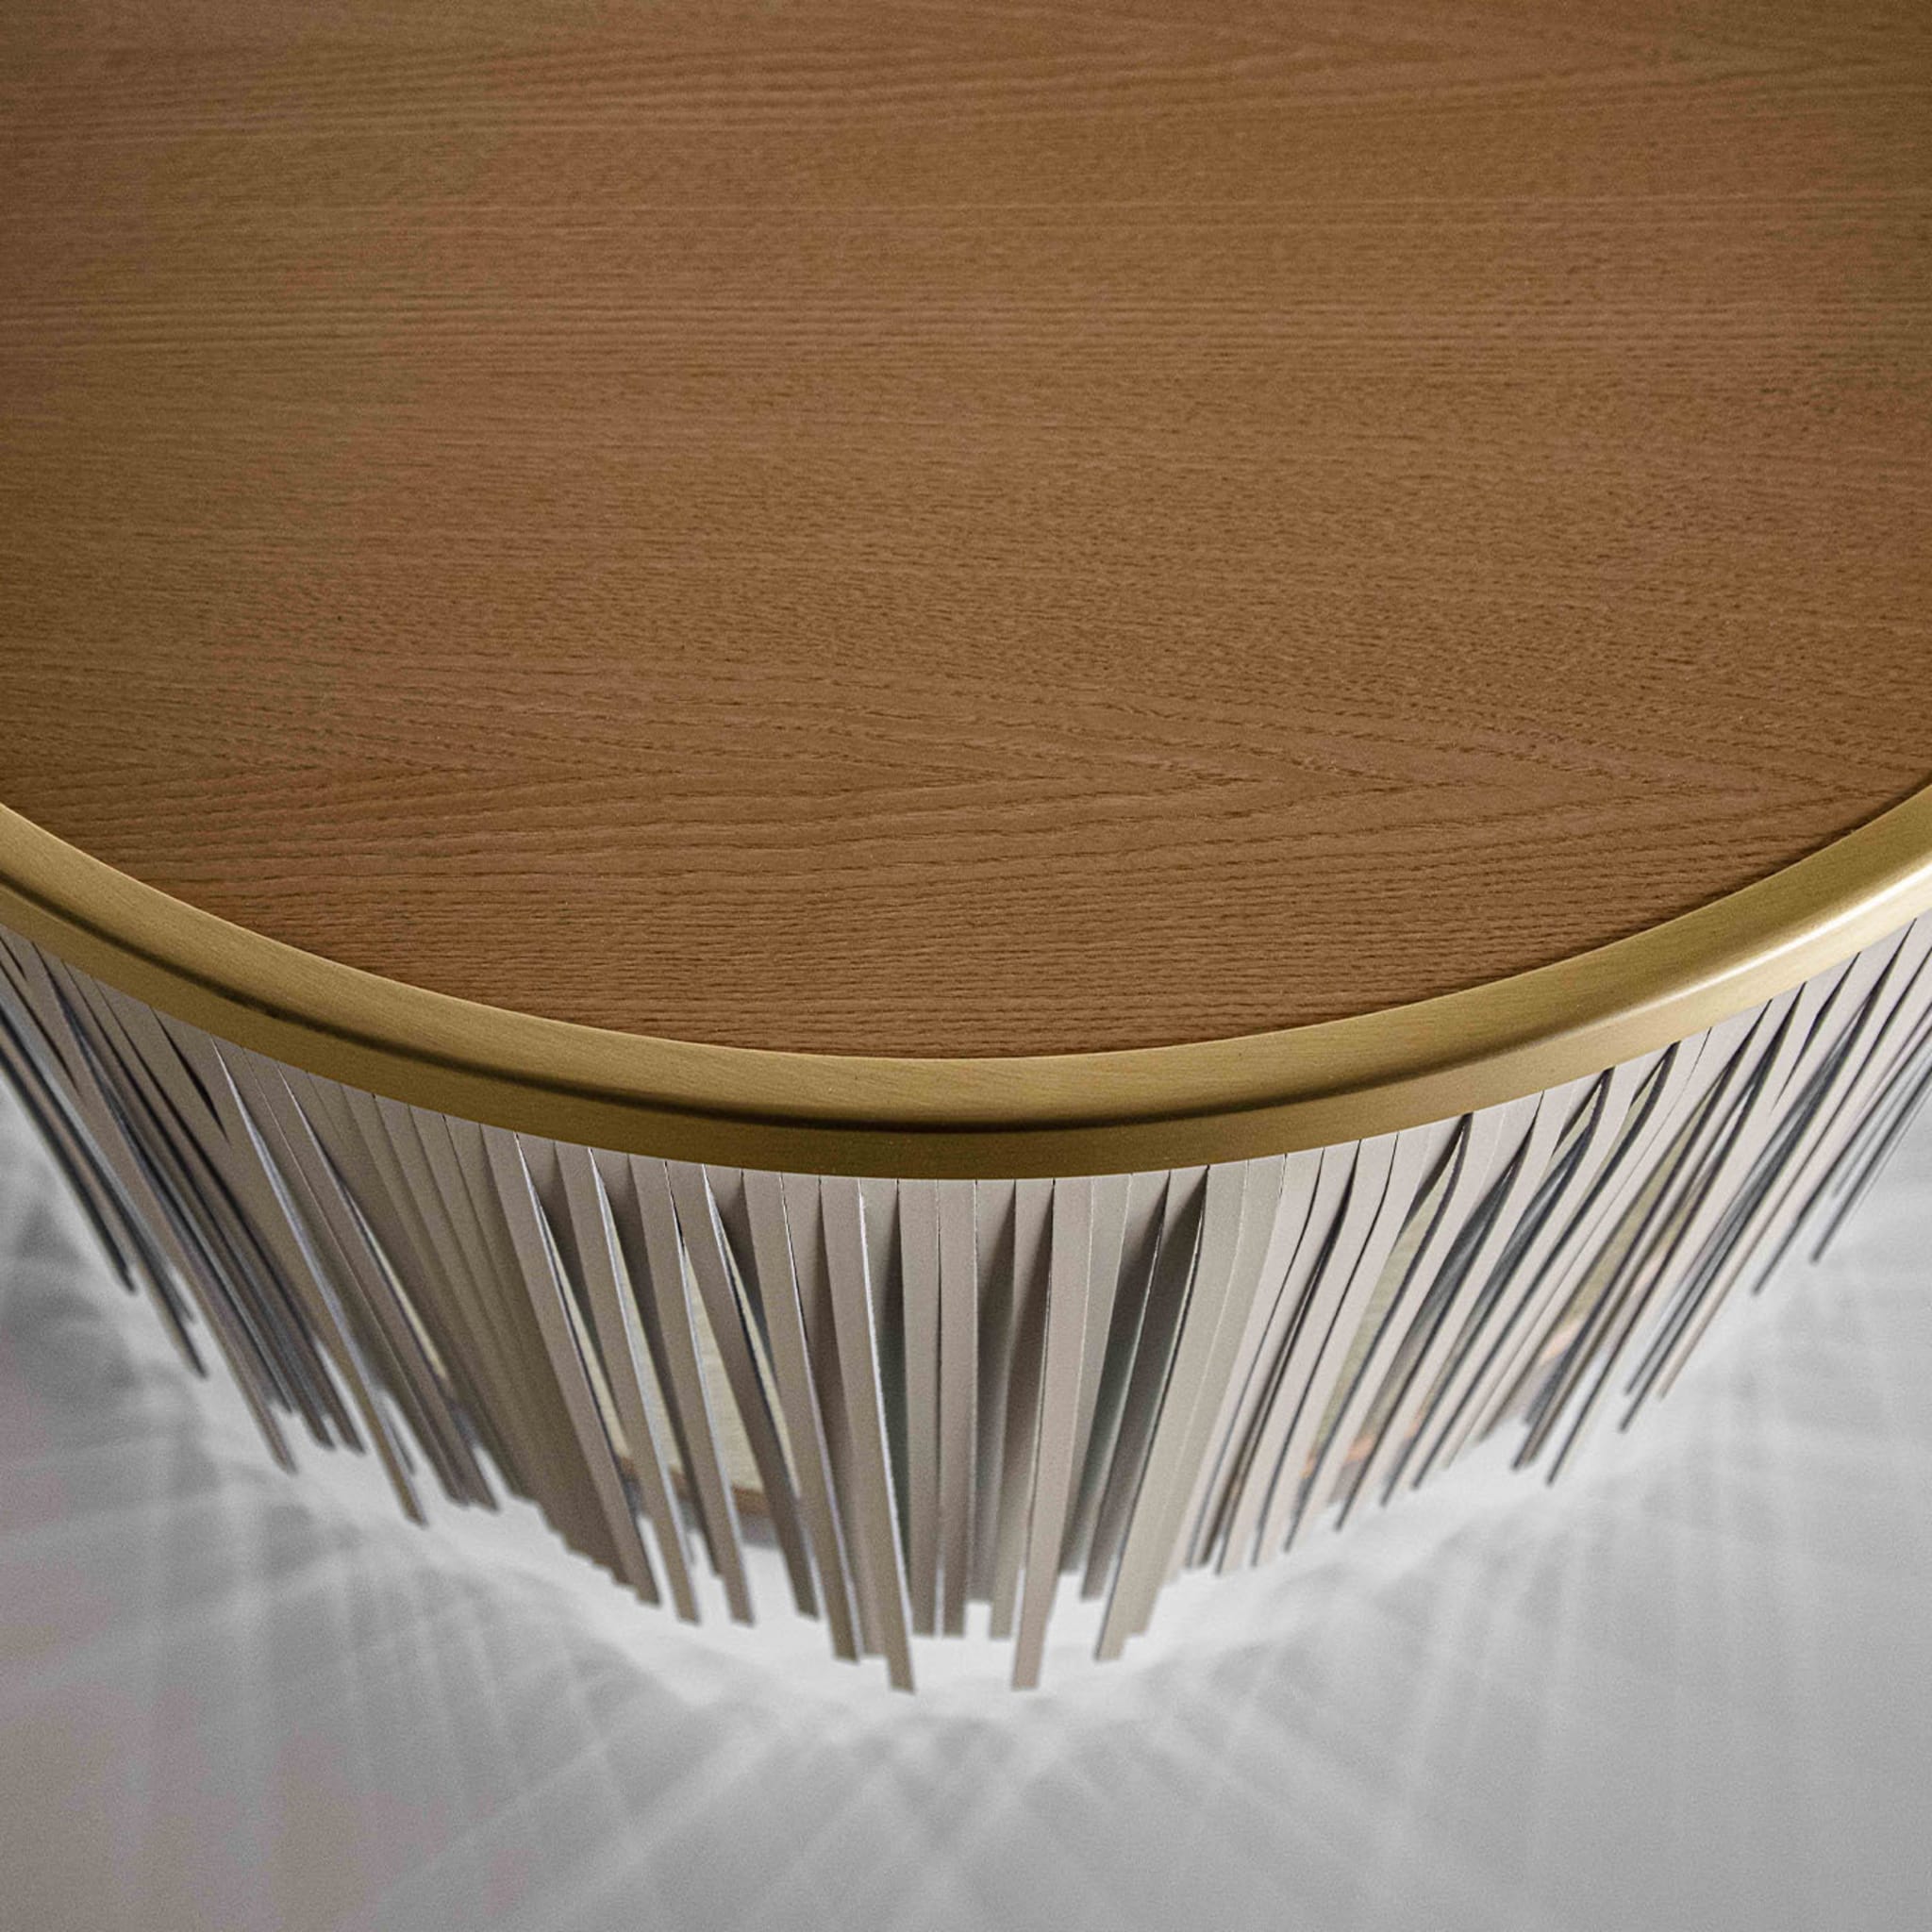 Indian Ash Coffee Table with Gray Leather Fringe - Alternative view 3